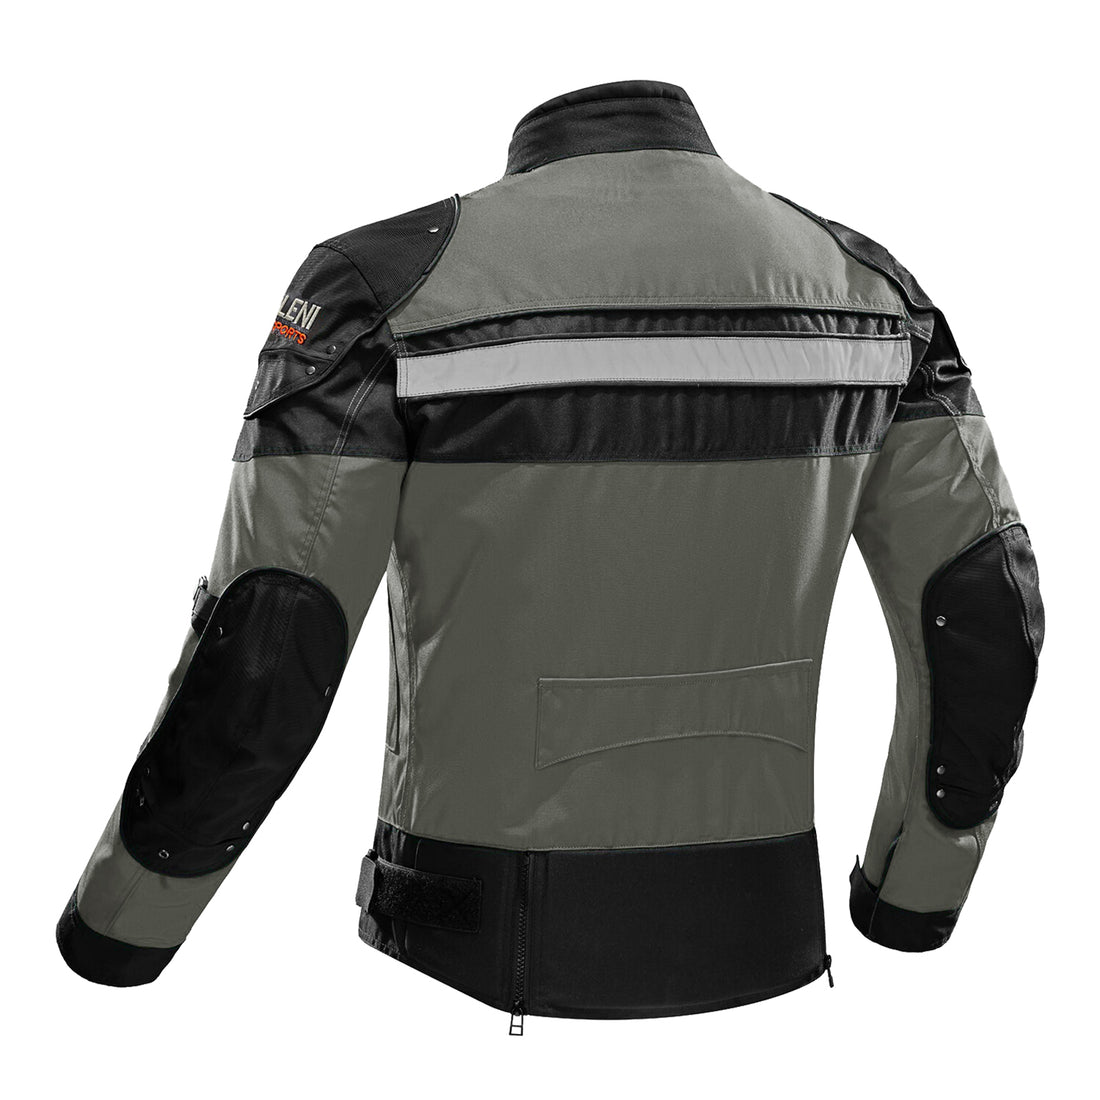 IRONJIAS protective riding jacket for men